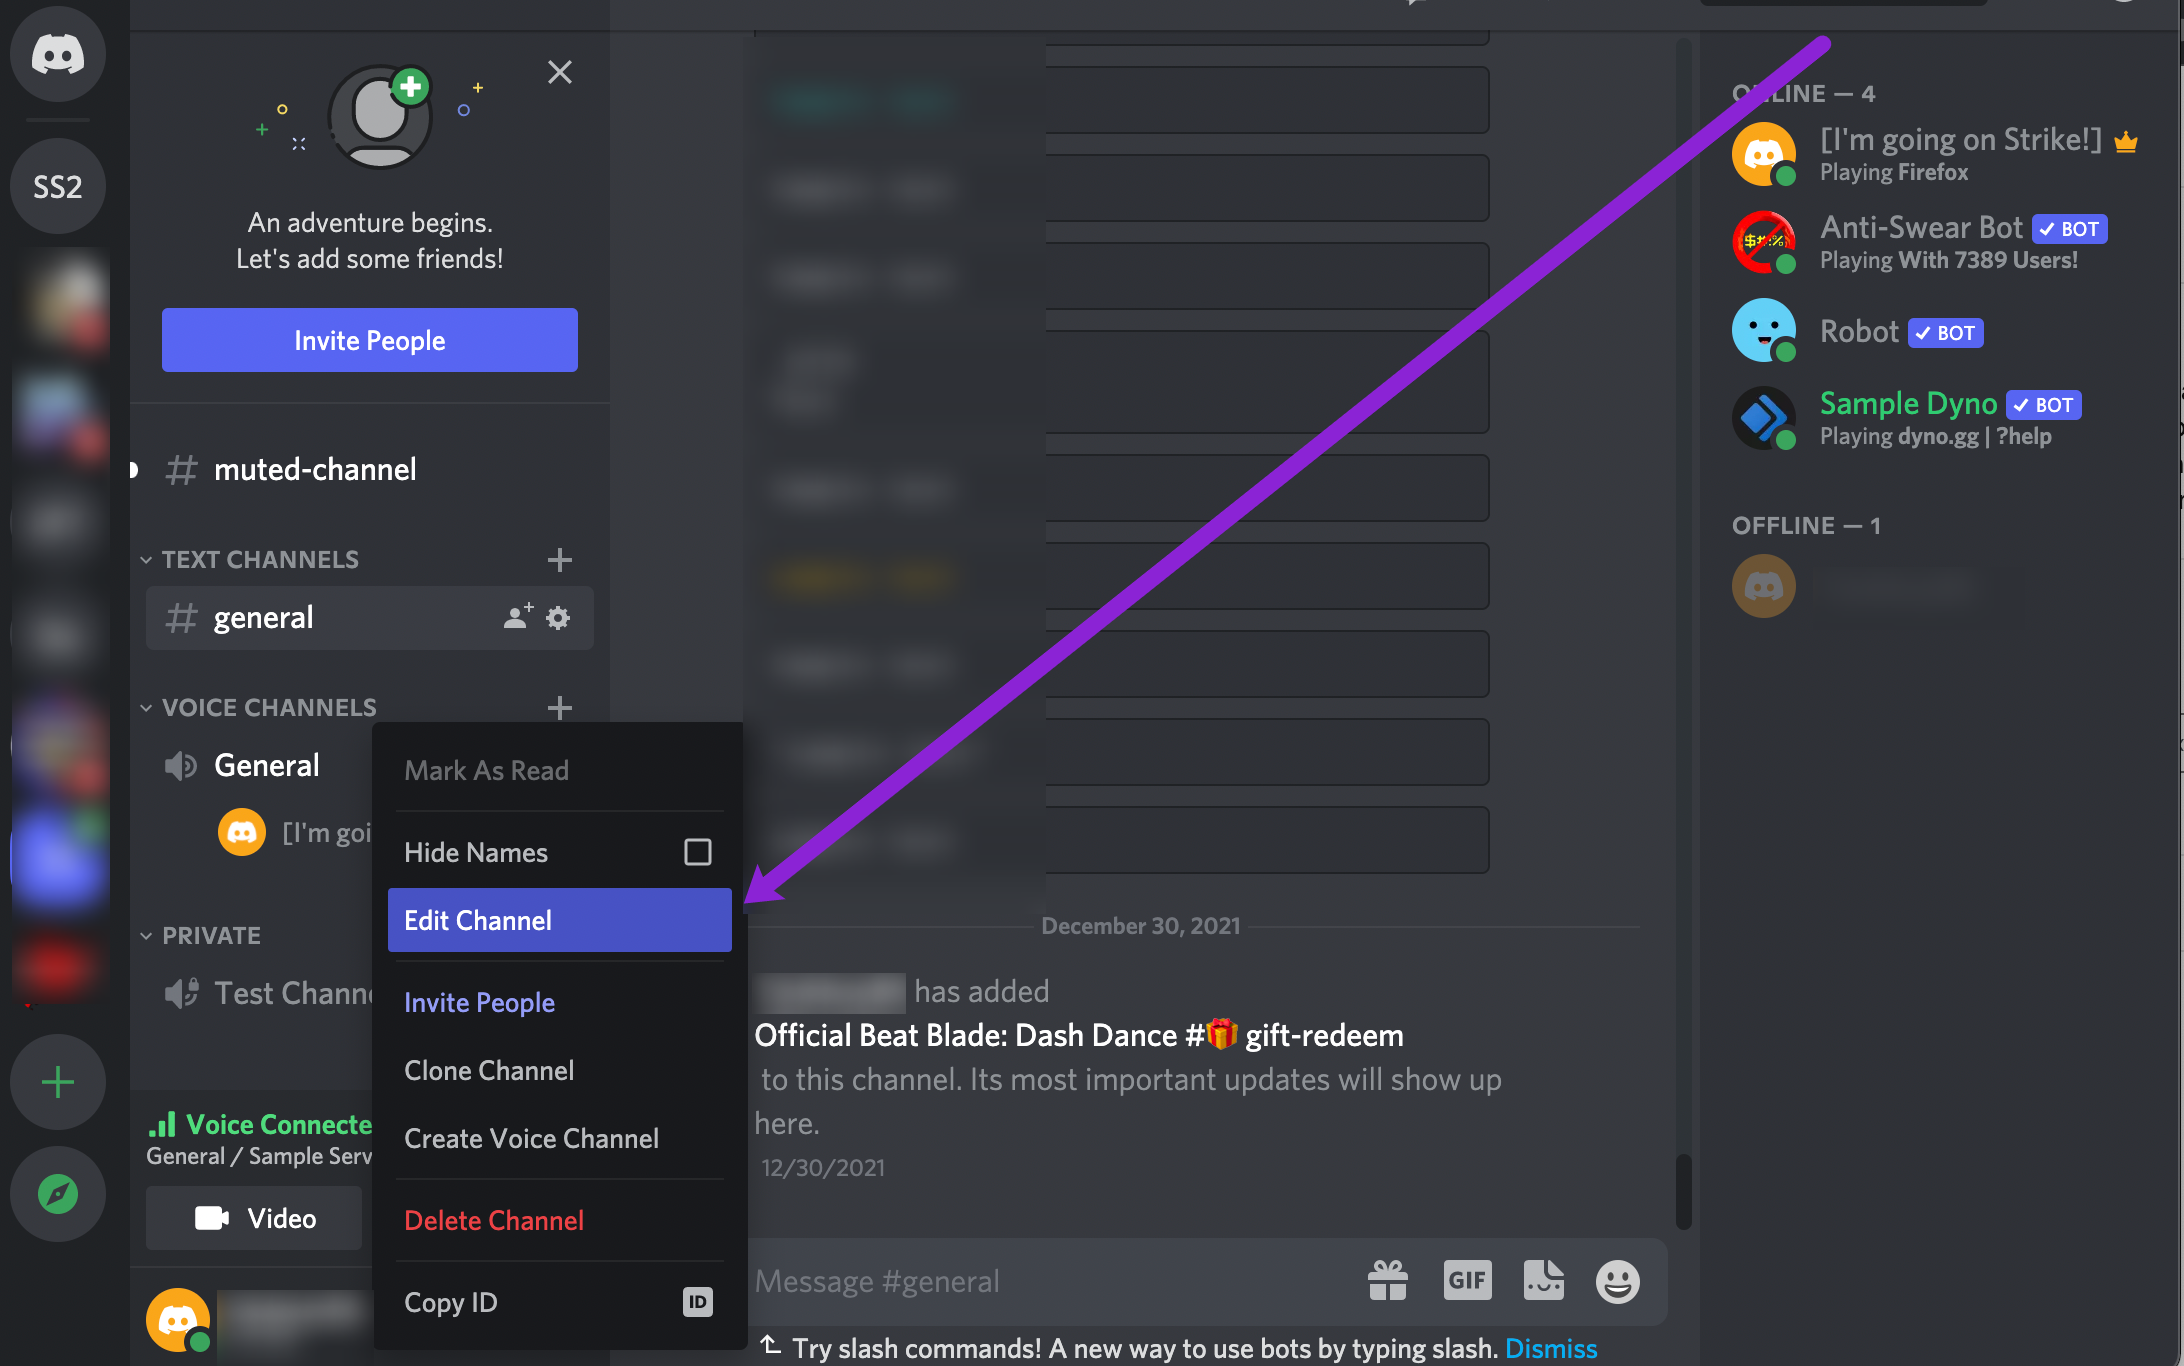 Now Available: Stream Your Xbox Games Directly to Discord